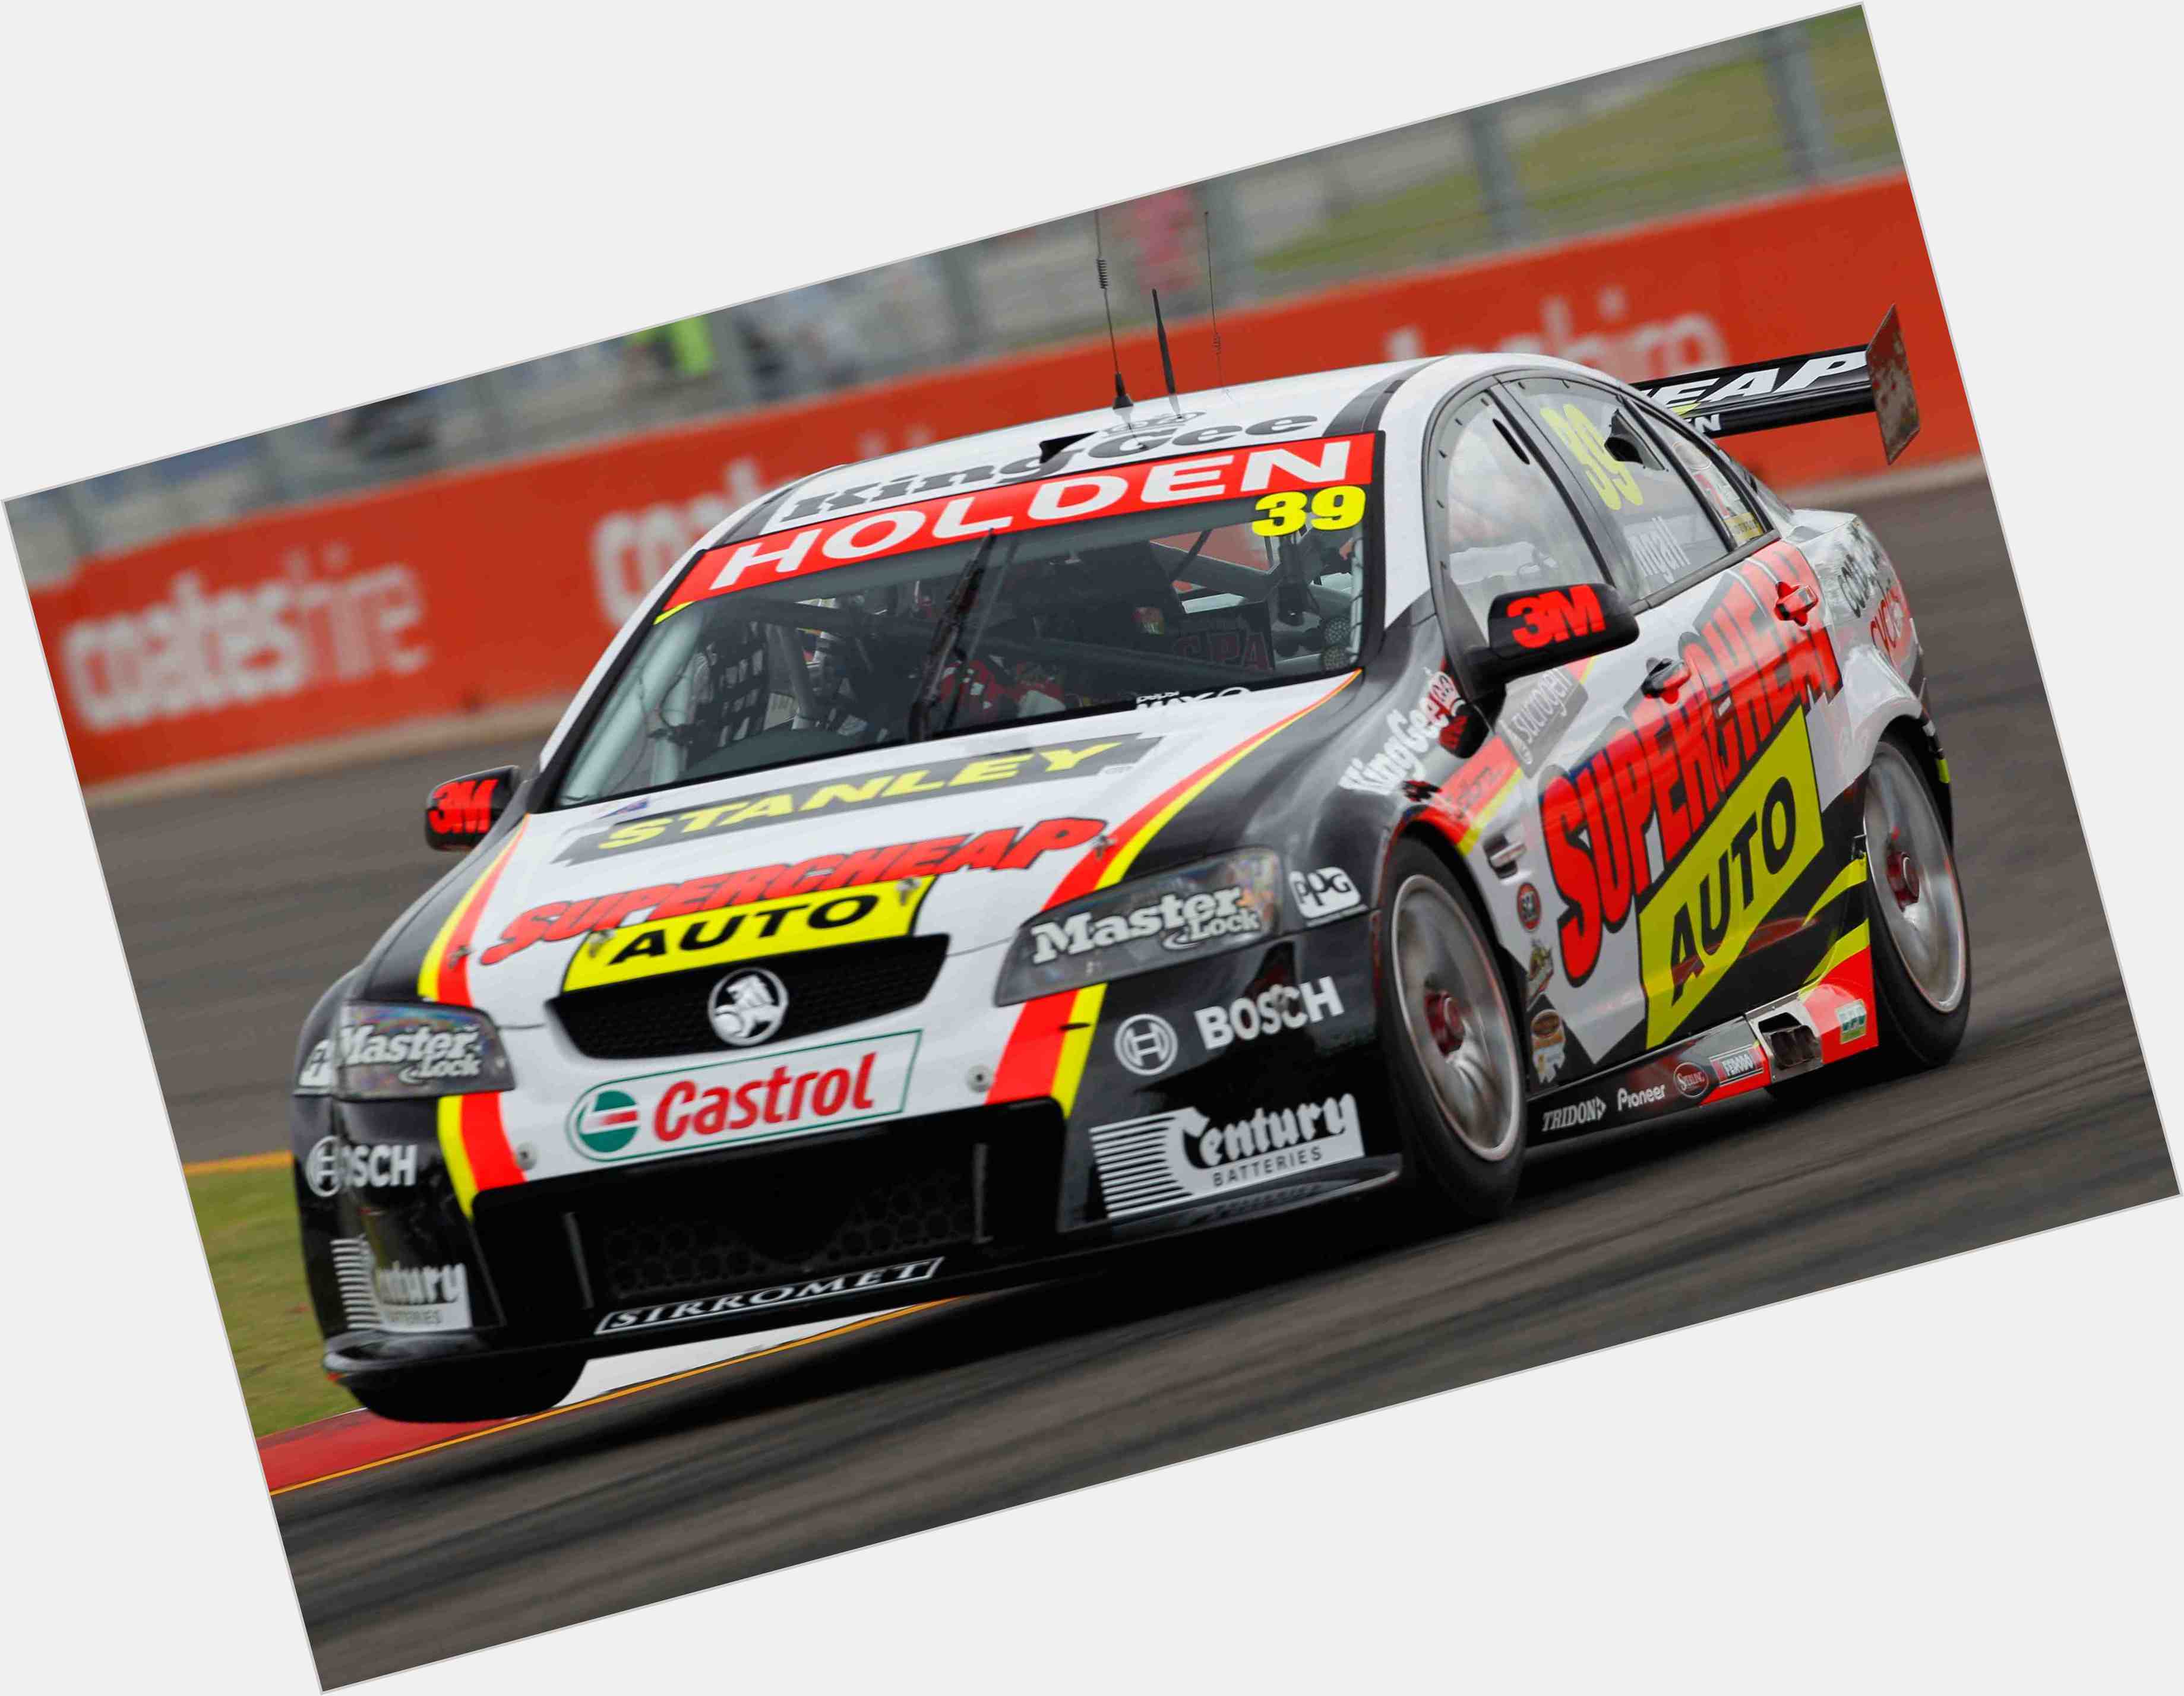 Https://fanpagepress.net/m/R/Russell Ingall New Pic 1